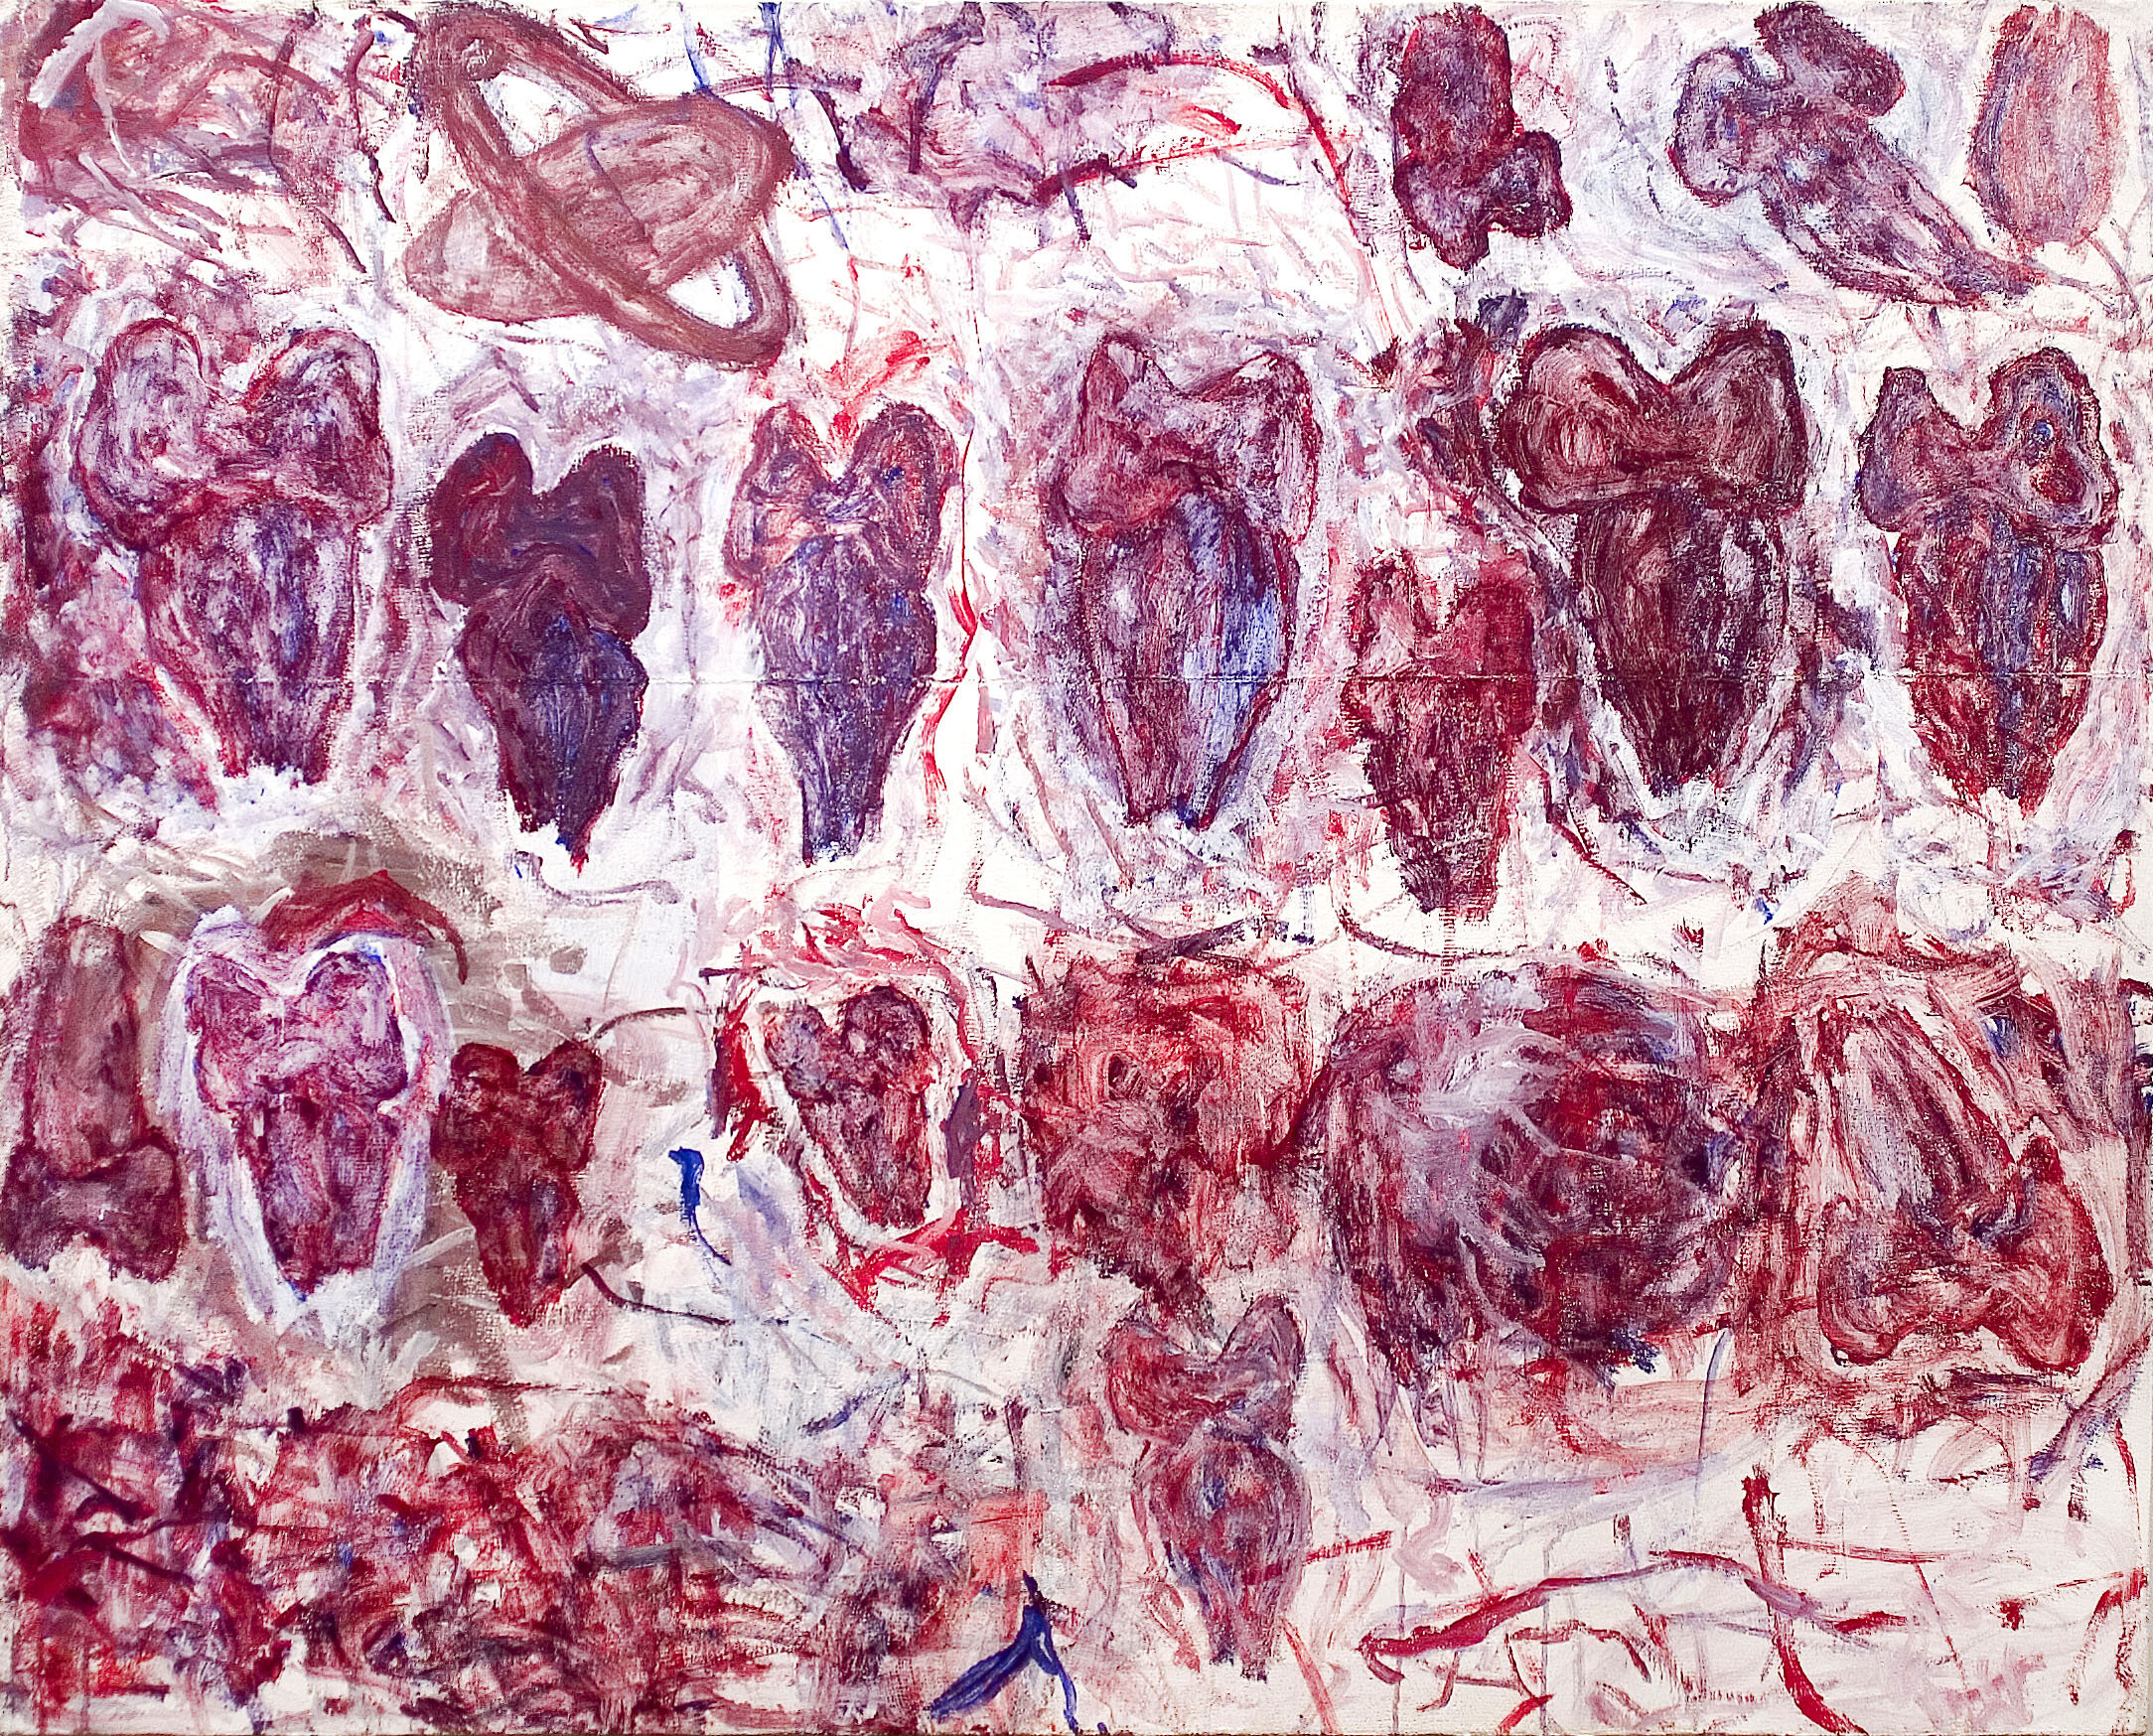   Distant Pleasures , 1985, acrylic, cast gesso and gauze mounted on canvas, 48 x 60 inches 